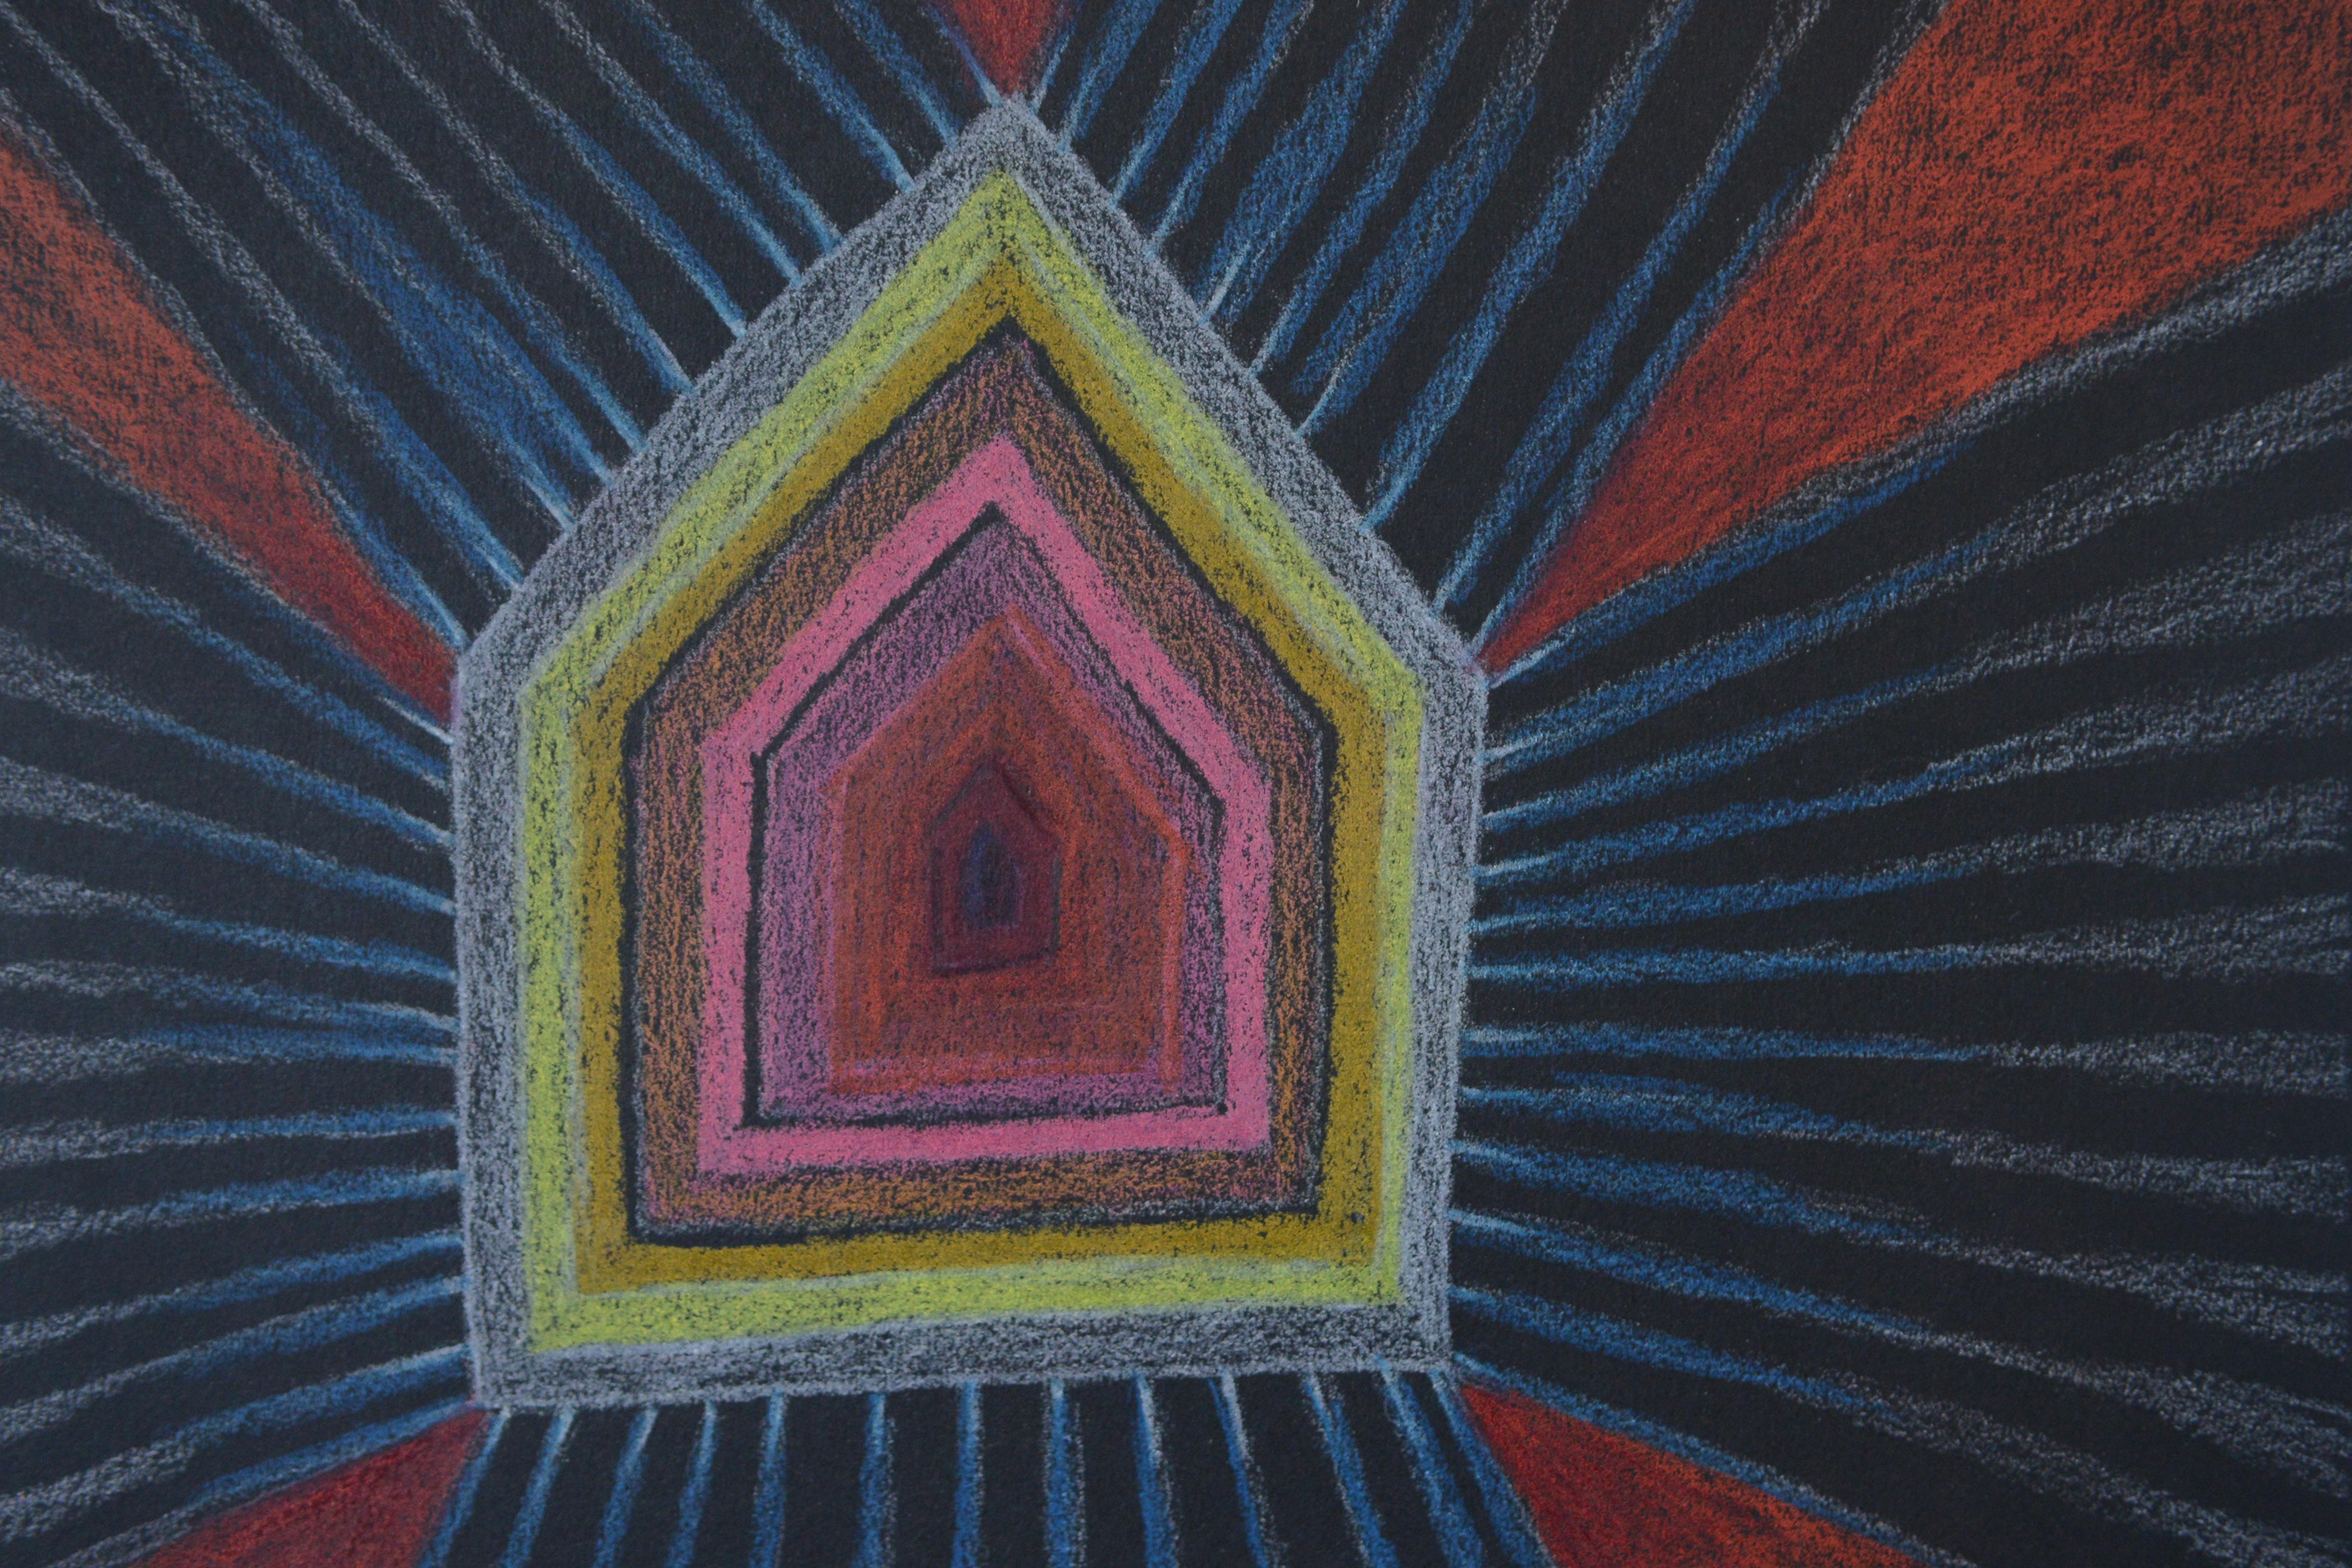 Opening Houses on Black 3, 2022. Coloured pencil on black paper, 20 x 20cm

Nicky Marais (b. 1962) is a Namibian artist, educator and activist. Marais is well-known for her abstract artworks created using a personal vocabulary of abstract forms and